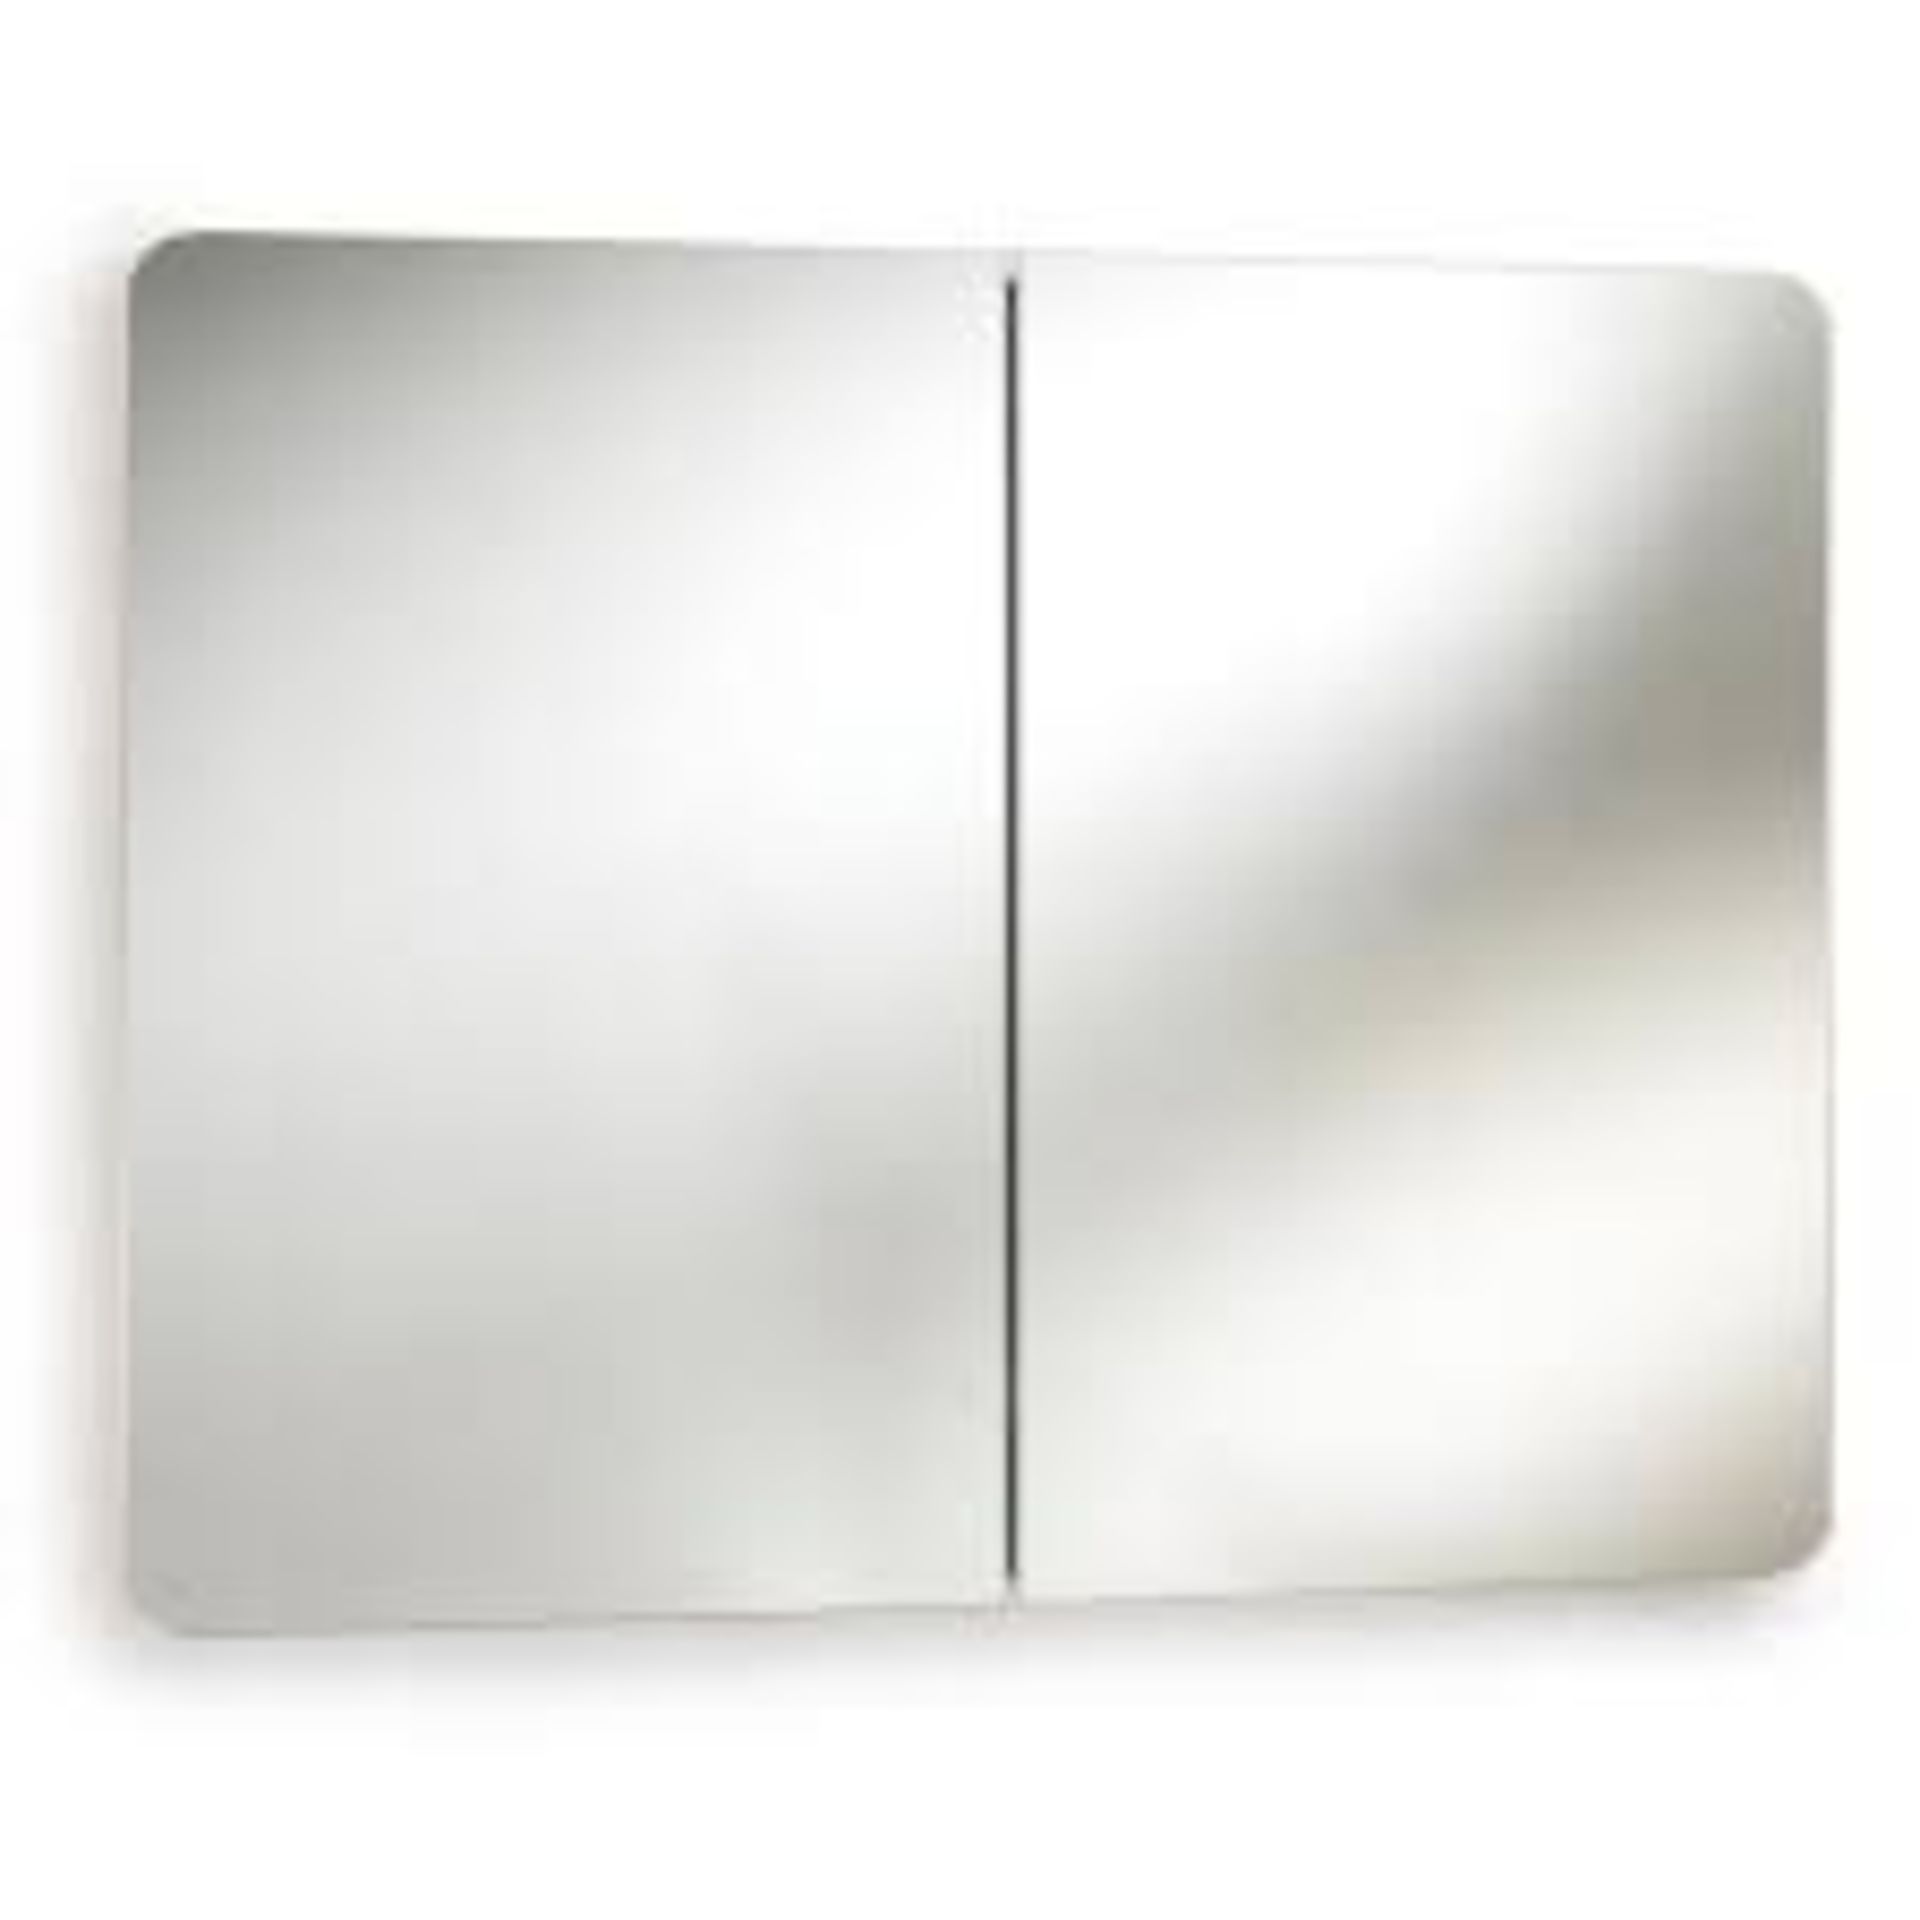 Boxed Austin 800 x 600 x120mm Mirrored Bathroom Cabinet RRP £150 (Pictures Are For Illustration